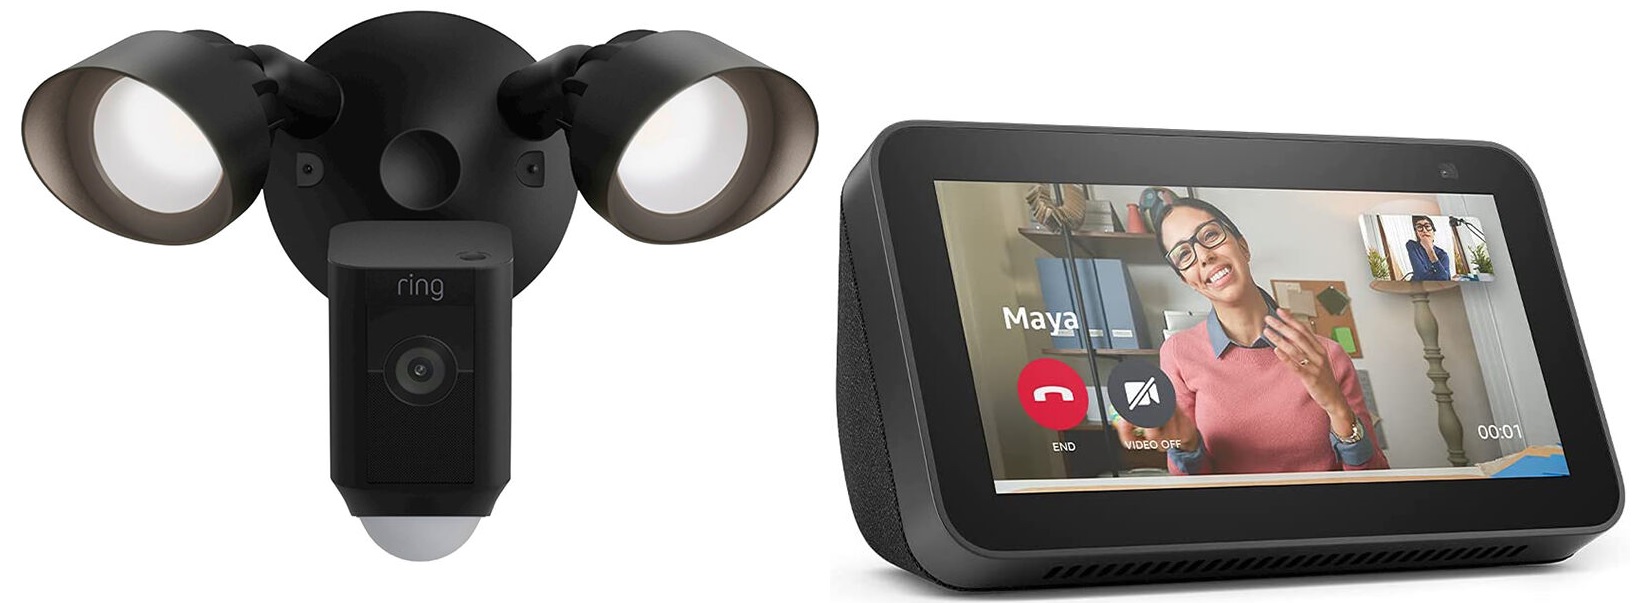 Ring Floodlight 1080p Motion Activated Wired Plus Cam (Black or White, 2021 release) + Echo Show 5 (2nd Gen) Bundle $140 + Free Shipping